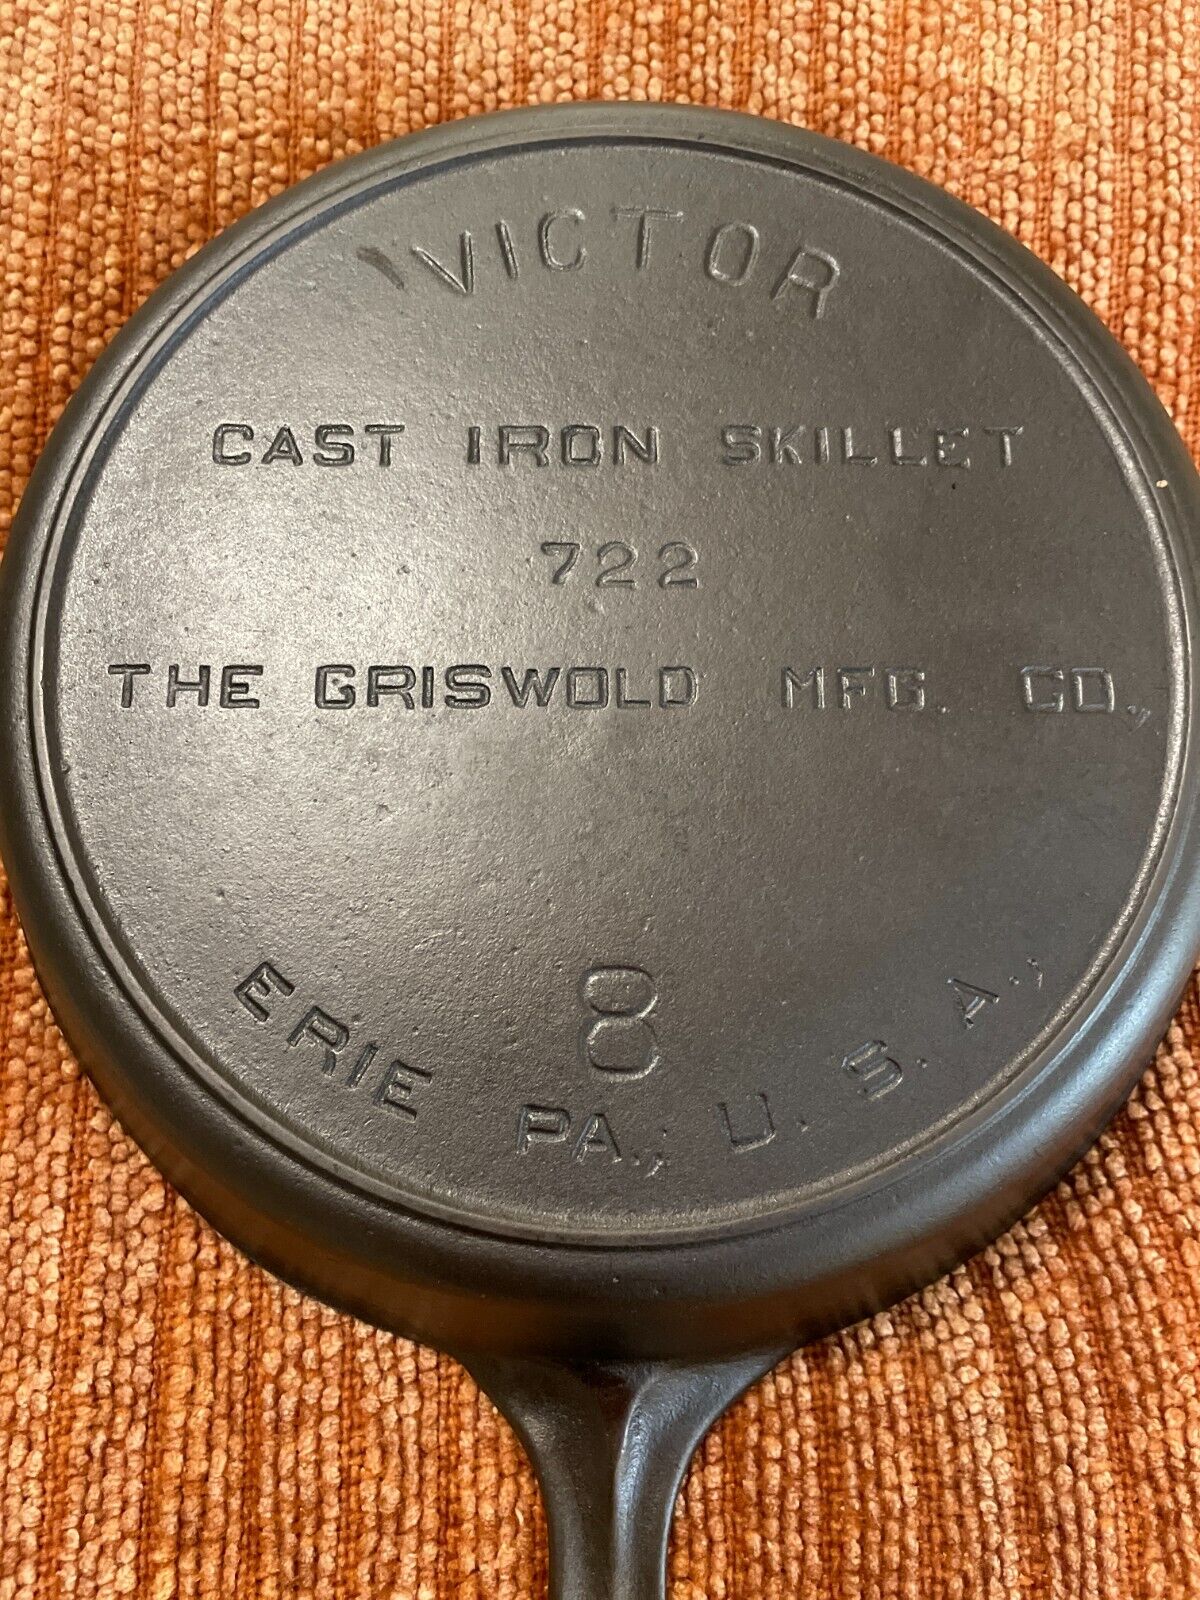 Victor #8 The Griswold Mfg. Co Erie PA 722 Cast Iron Skillet Restored Heat Ring